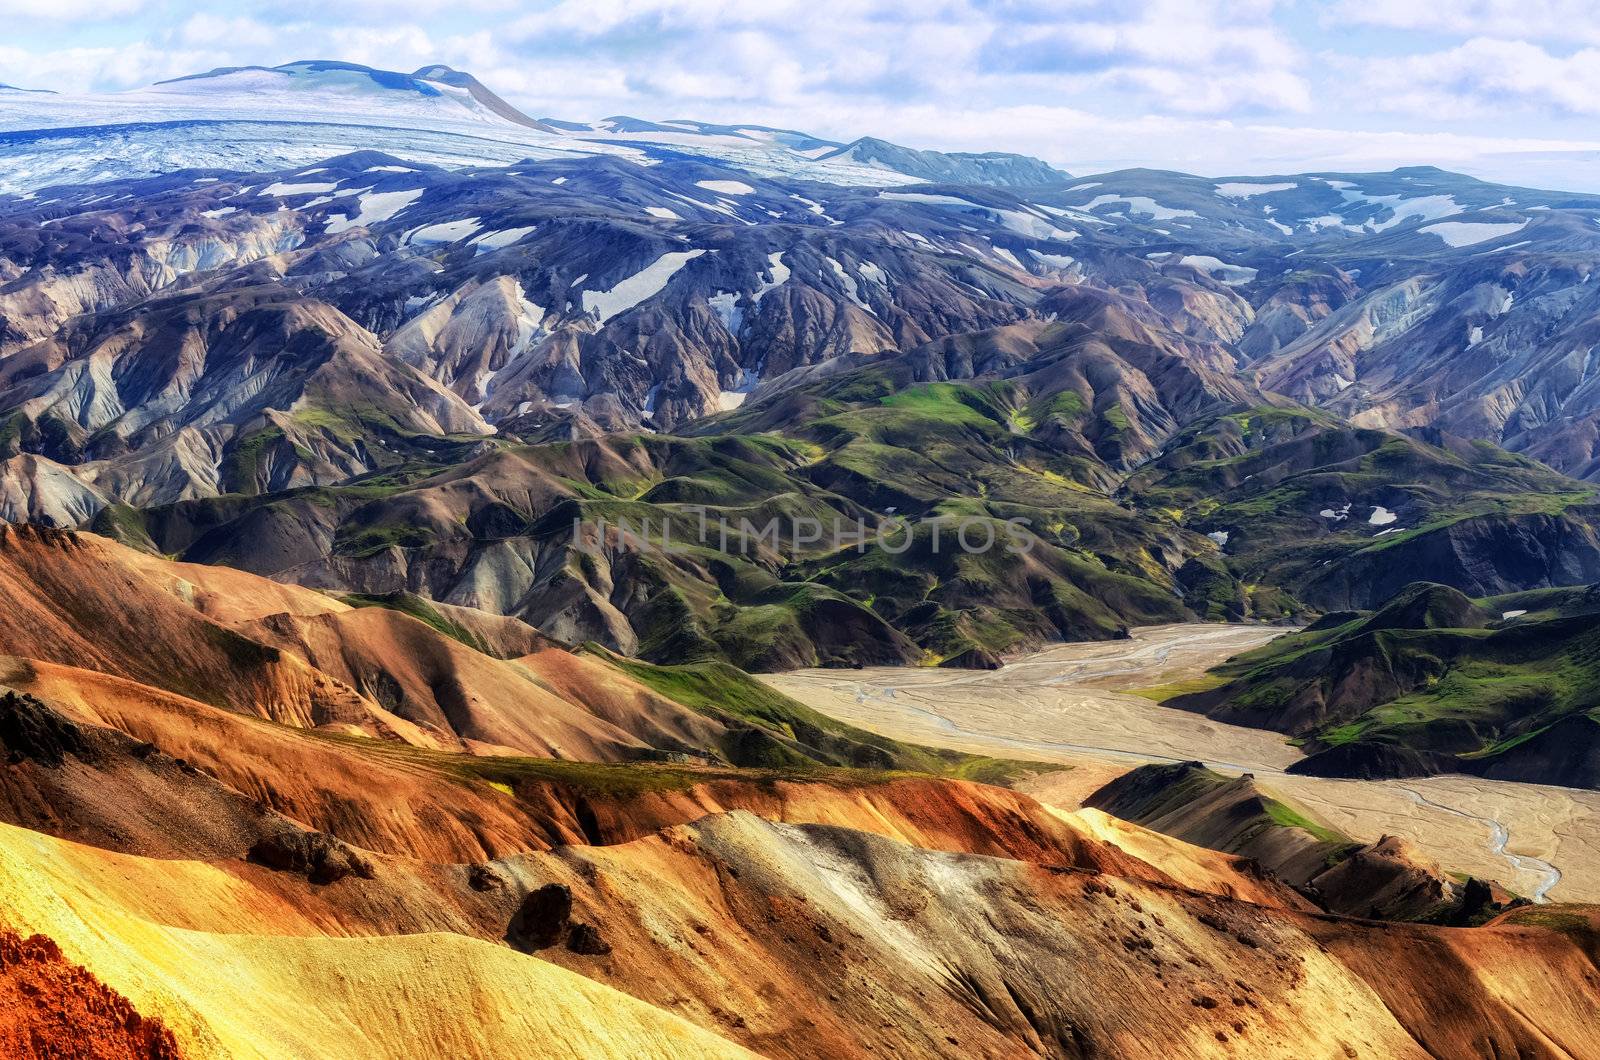 Landmannalaugar colorful mountains landscape view, Iceland by martinm303